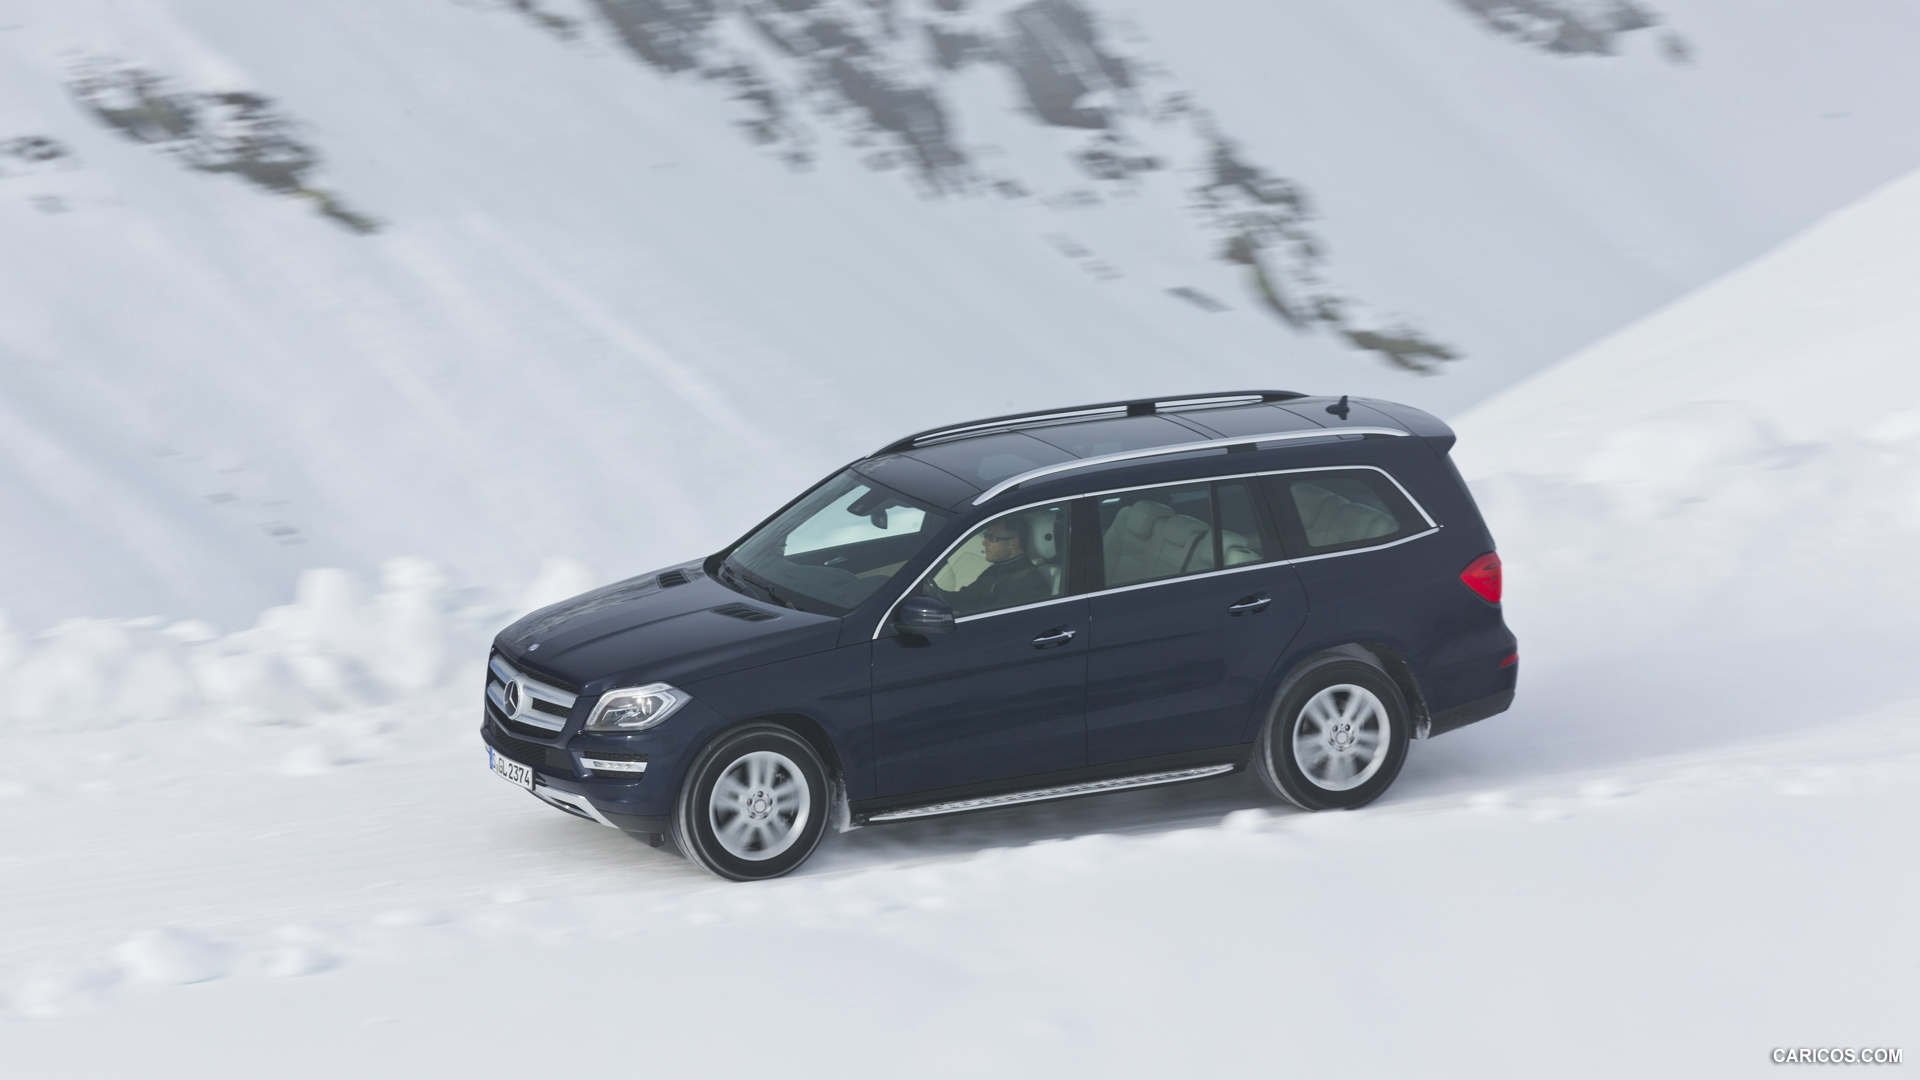 2013 Mercedes-Benz GL 500 4MATIC on Snow - Side, #230 of 259